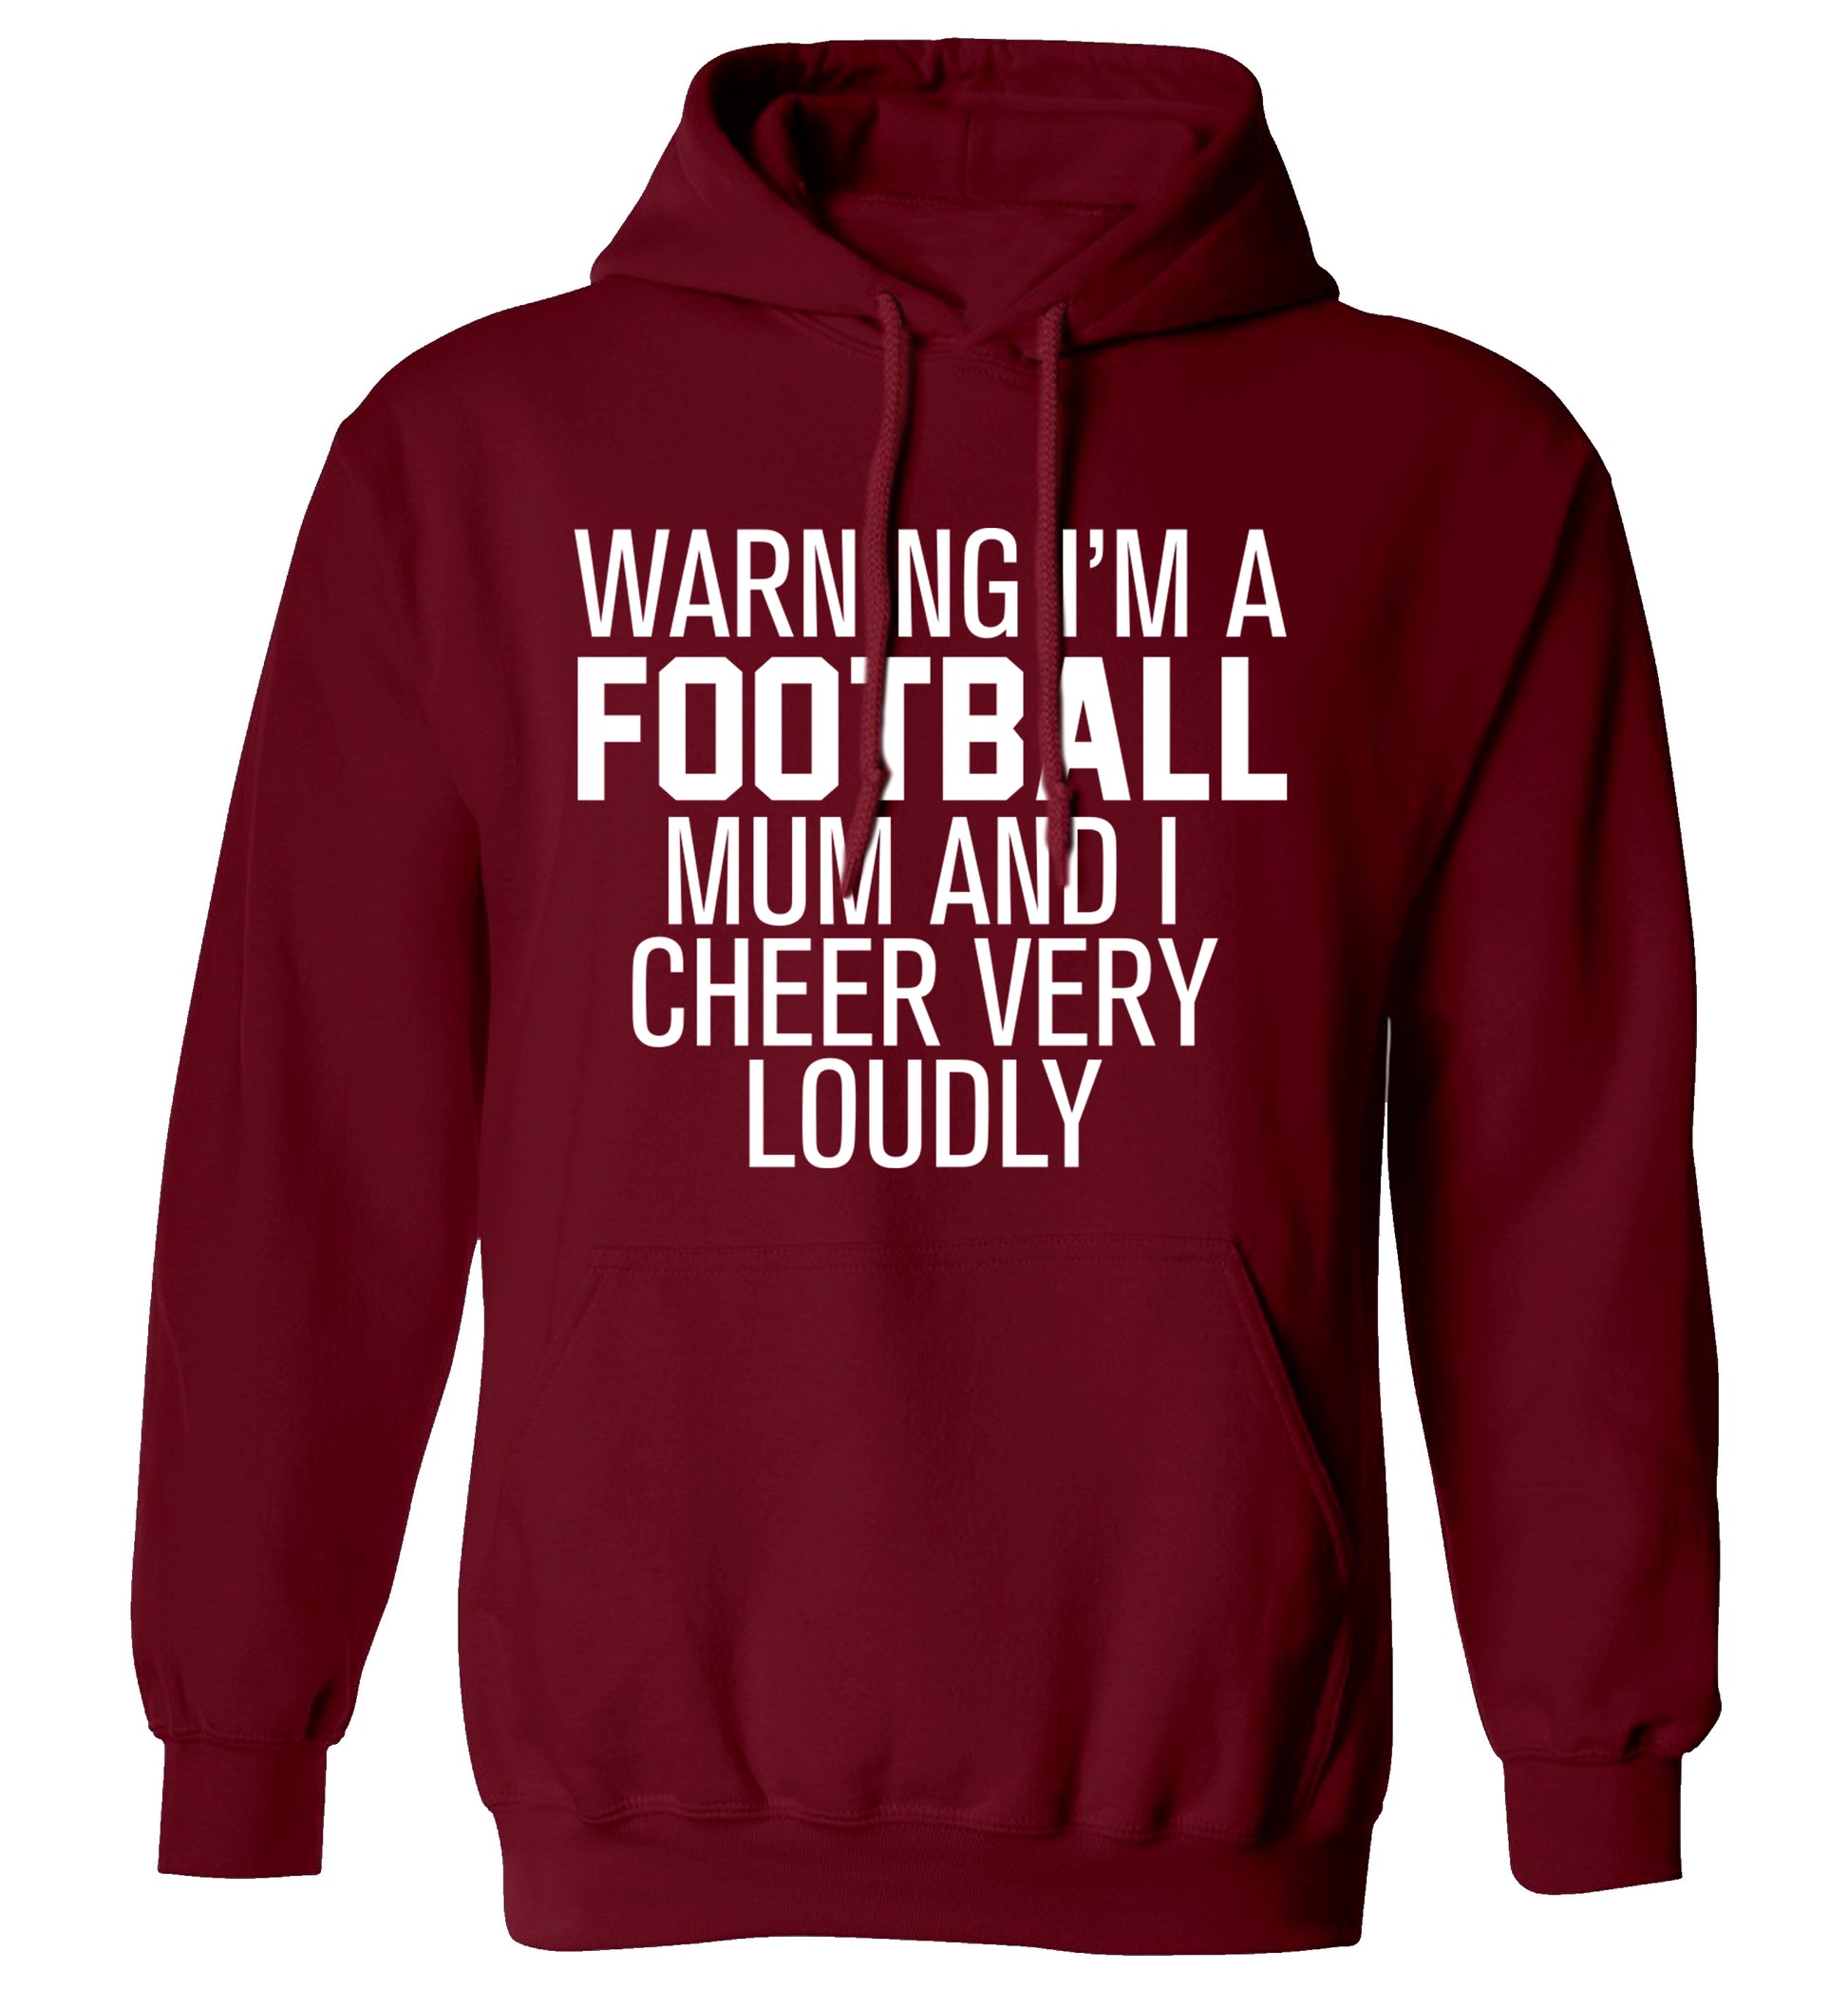 Warning I'm a football mum and I cheer very loudly adults unisexmaroon hoodie 2XL